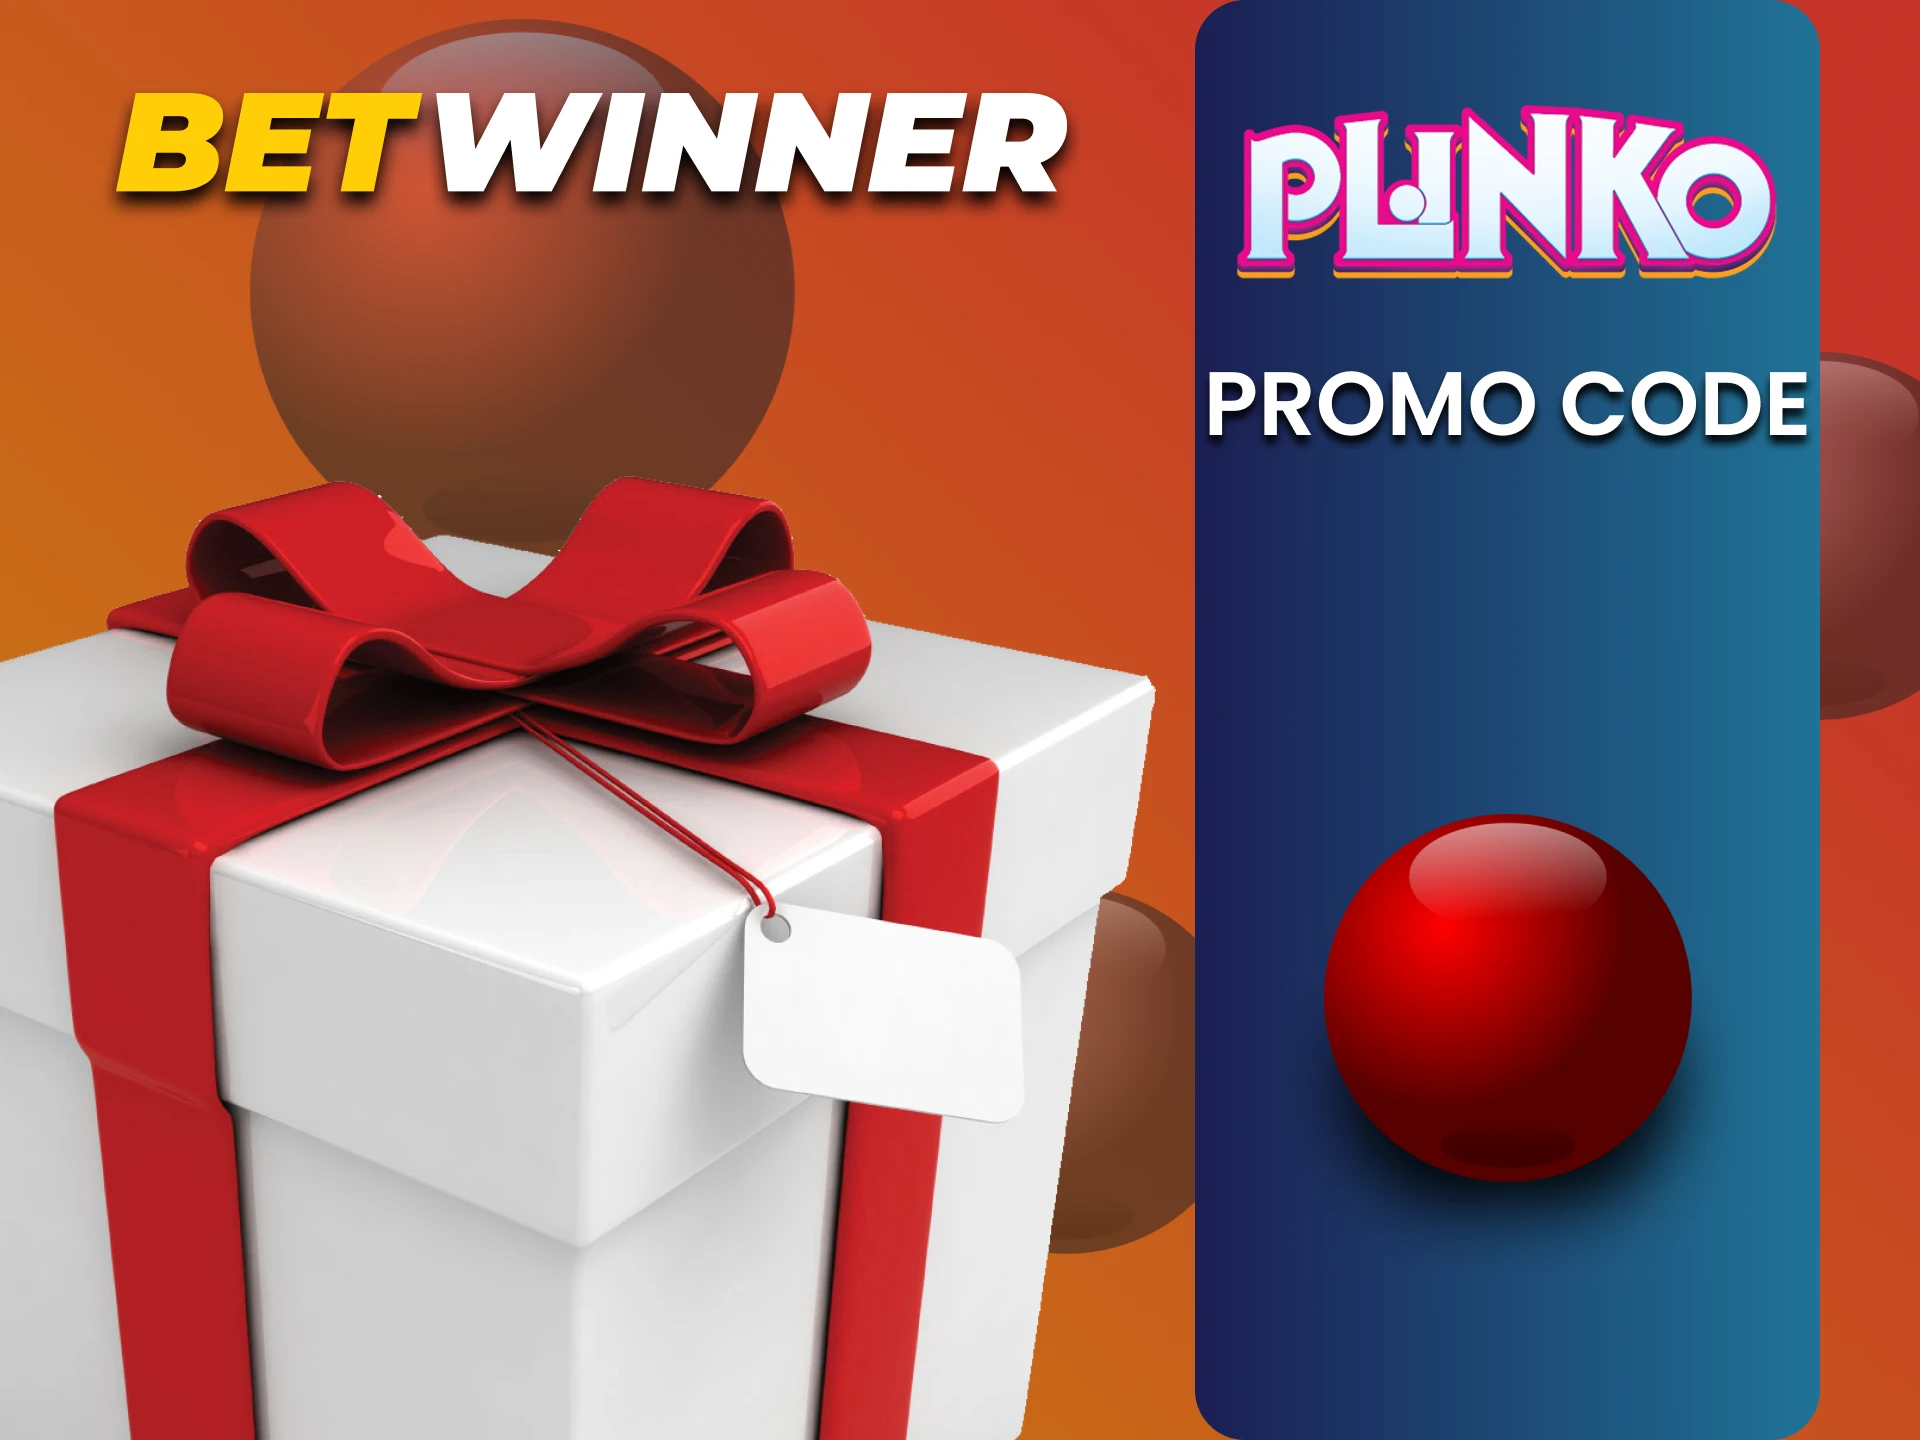 Use promo code from Betwinner for Plinko.